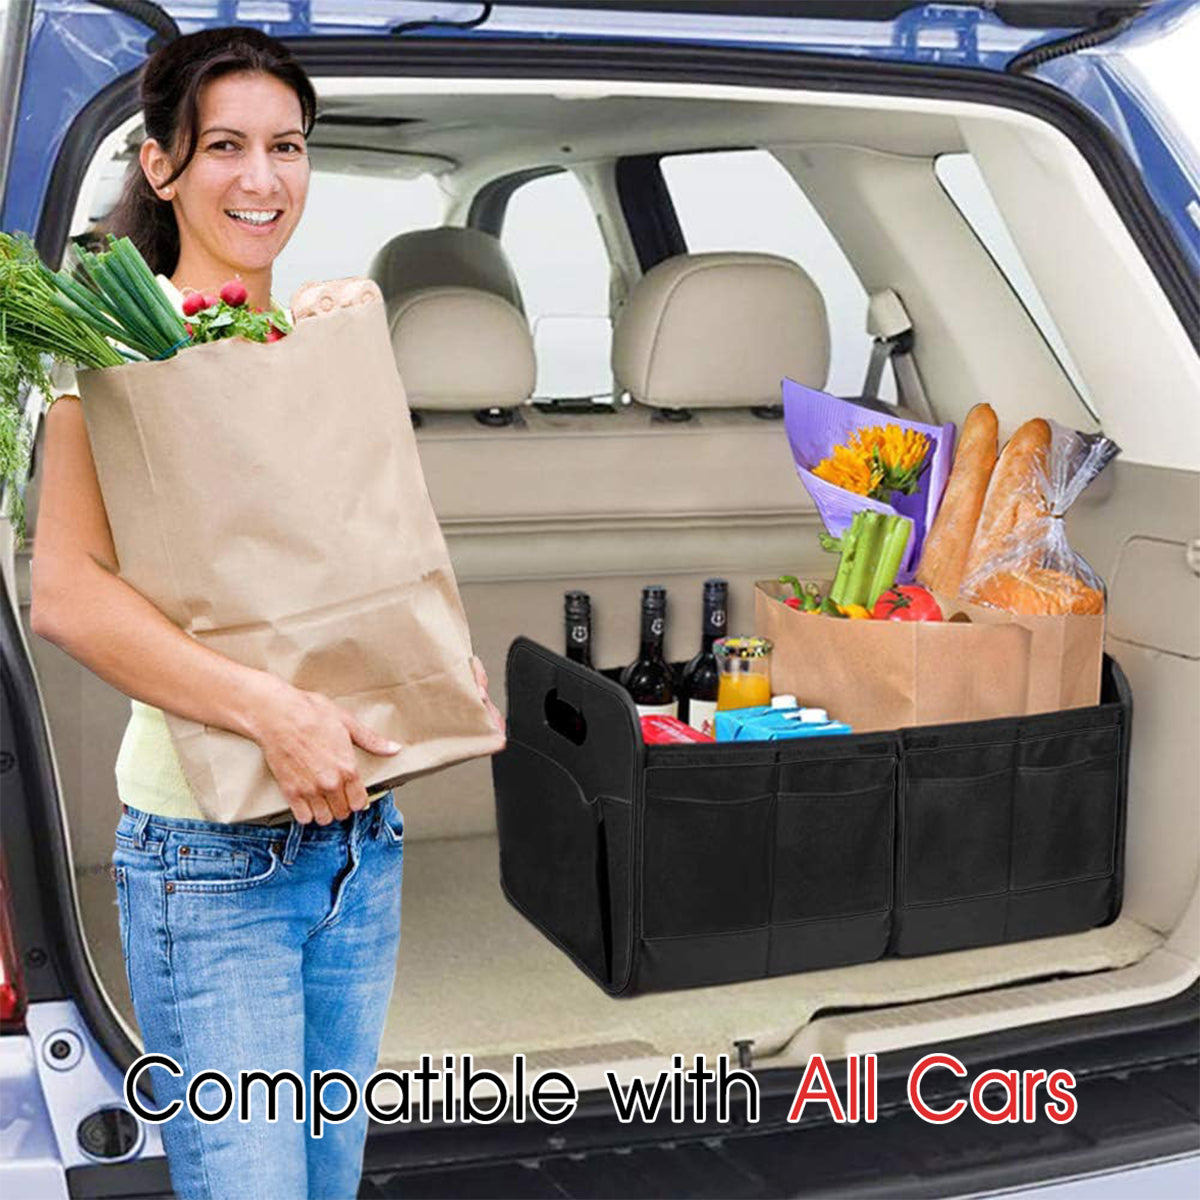 Trunk Organizer, Car Storage, Custom For Your Cars, Reinforced Handles, Collapsible Multi, Compartment Car Organizers, Foldable and Waterproof, 600D Oxford Polyester VE12995